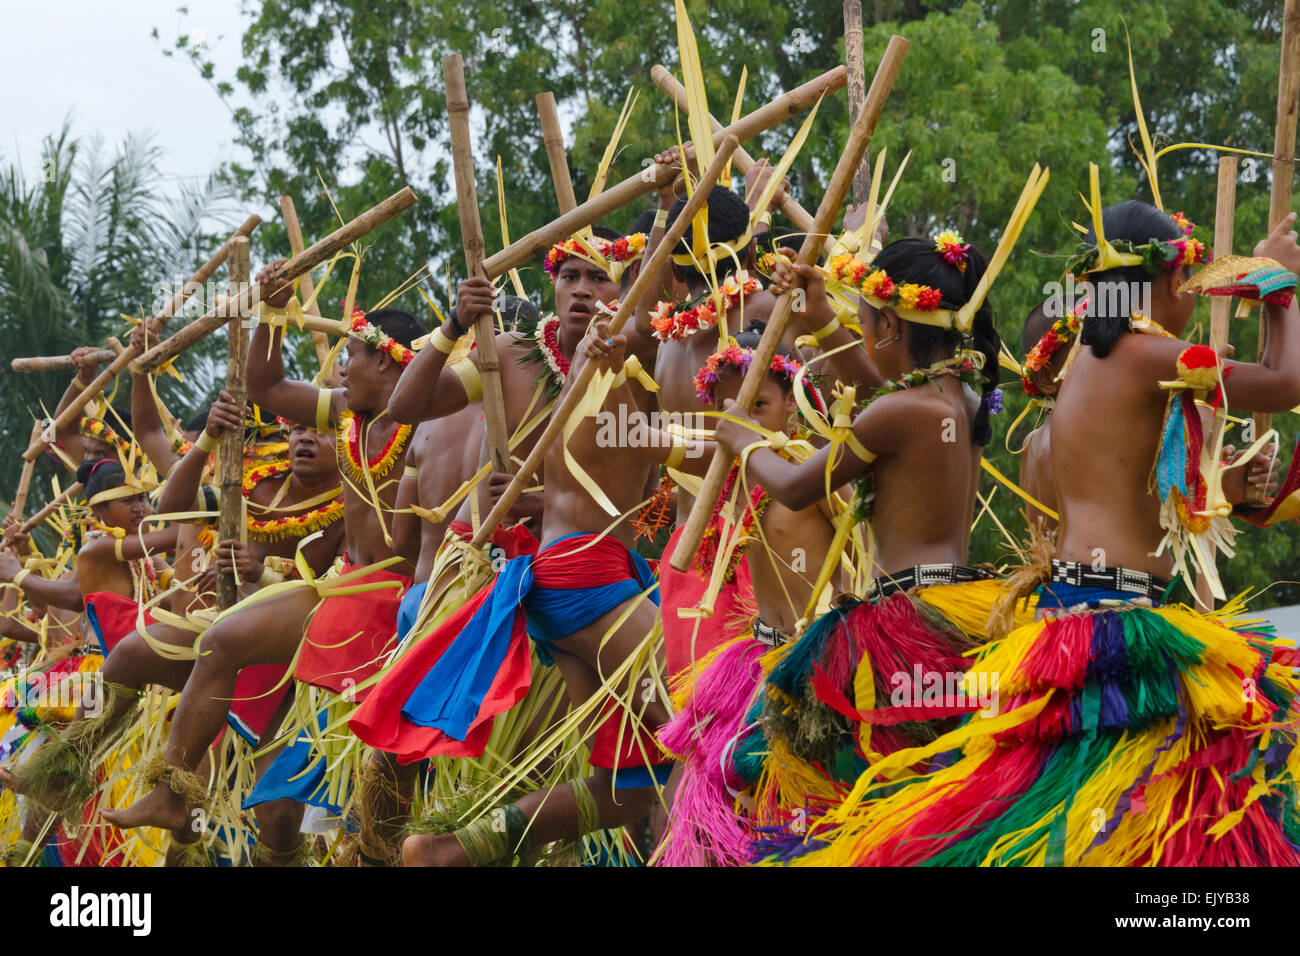 Boys and girls in traditional clothing dancing with bamboo pole at Yap Day Festival, Yap Island, Federated States of Micronesia Stock Photo